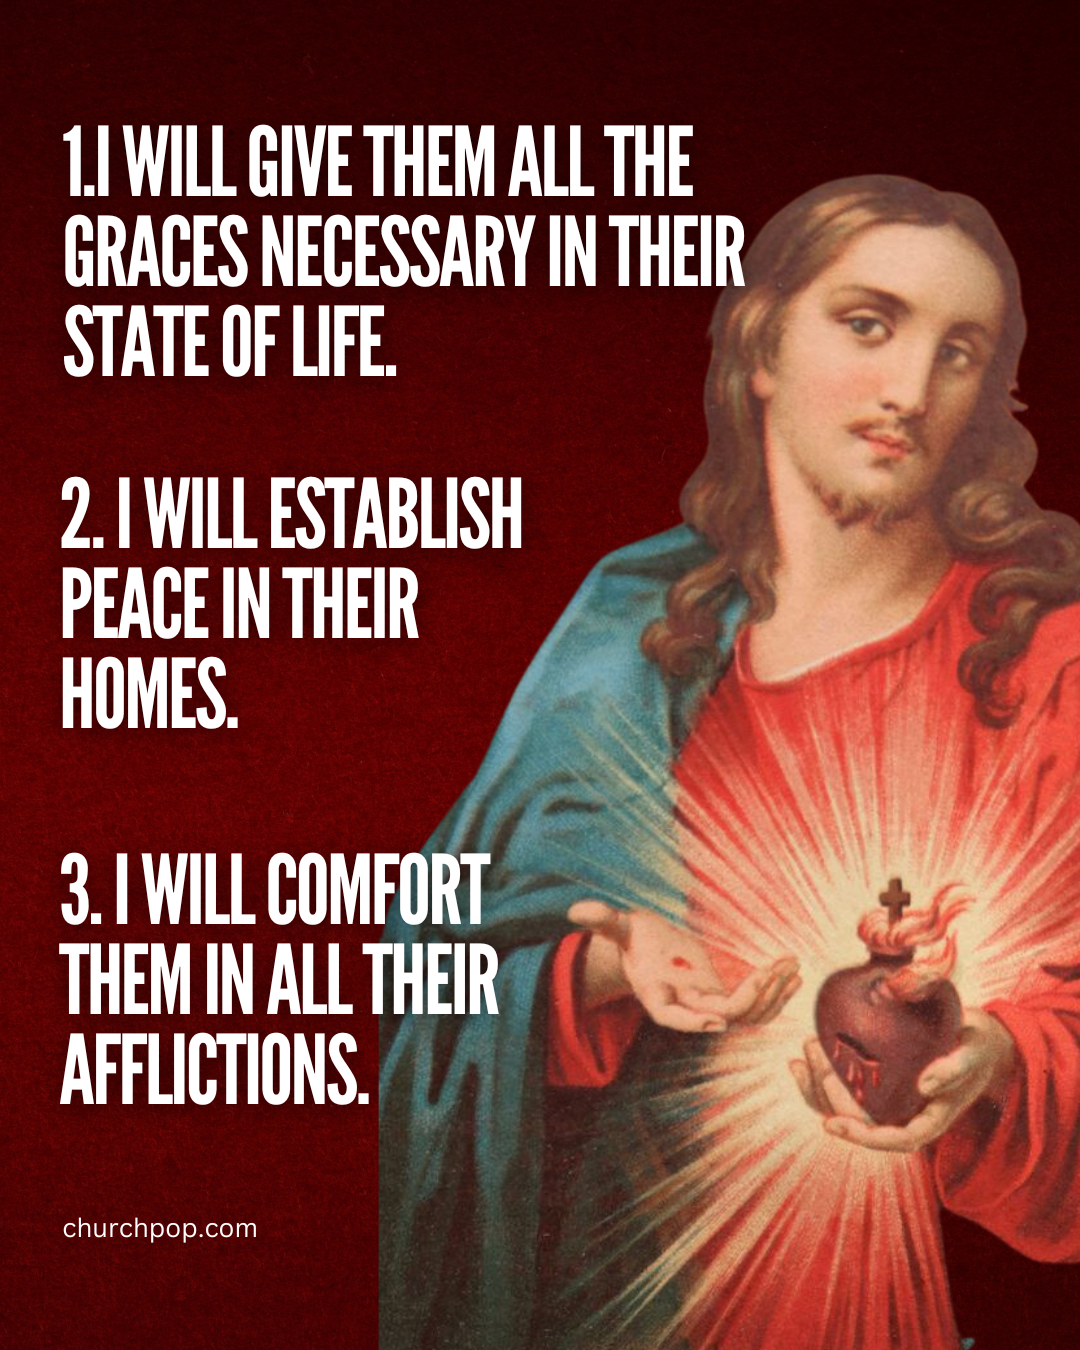 What is the Sacred Heart of Jesus?